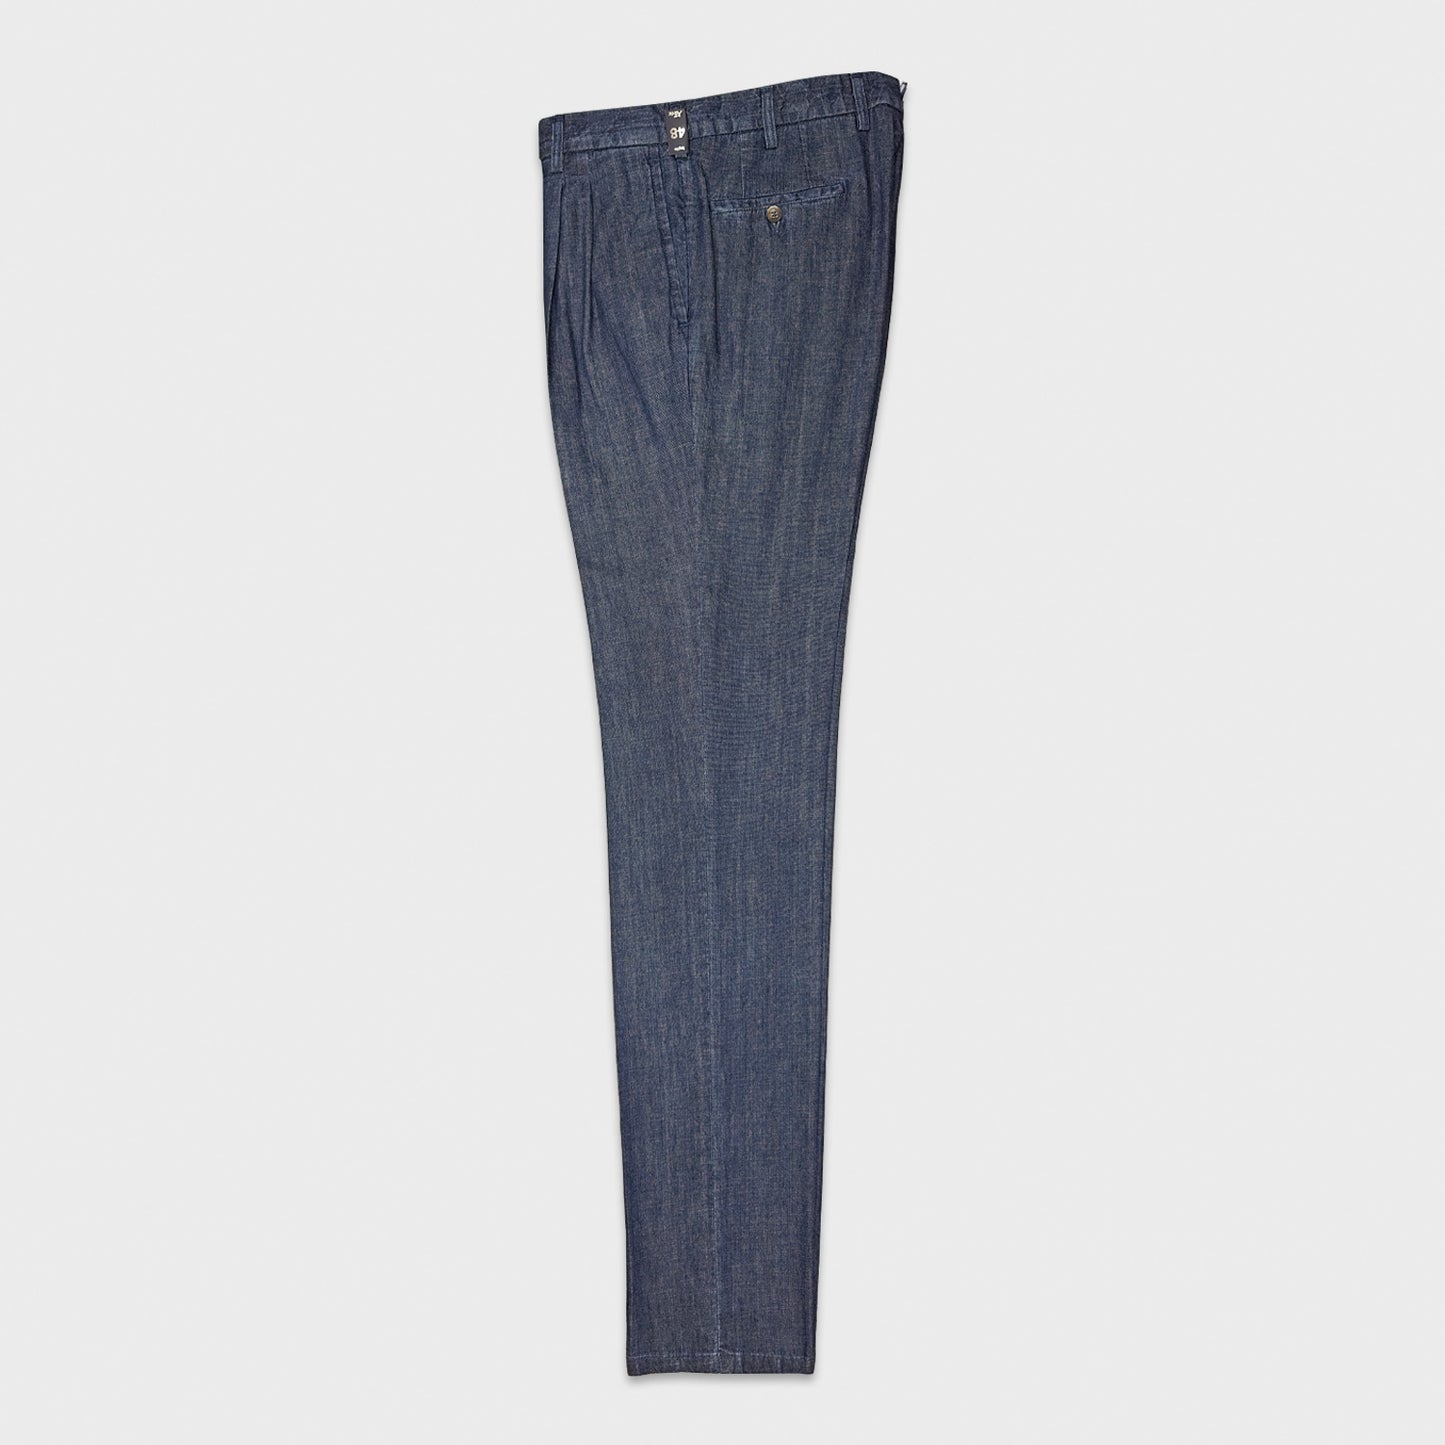 Load image into Gallery viewer, Indigo Blue Tailored Chambray Jeans Canvas Kurabo. Rotasport by Rota pantaloni, handmade in Italy with a soft and refined Japanese Kurabo denim fabric.
